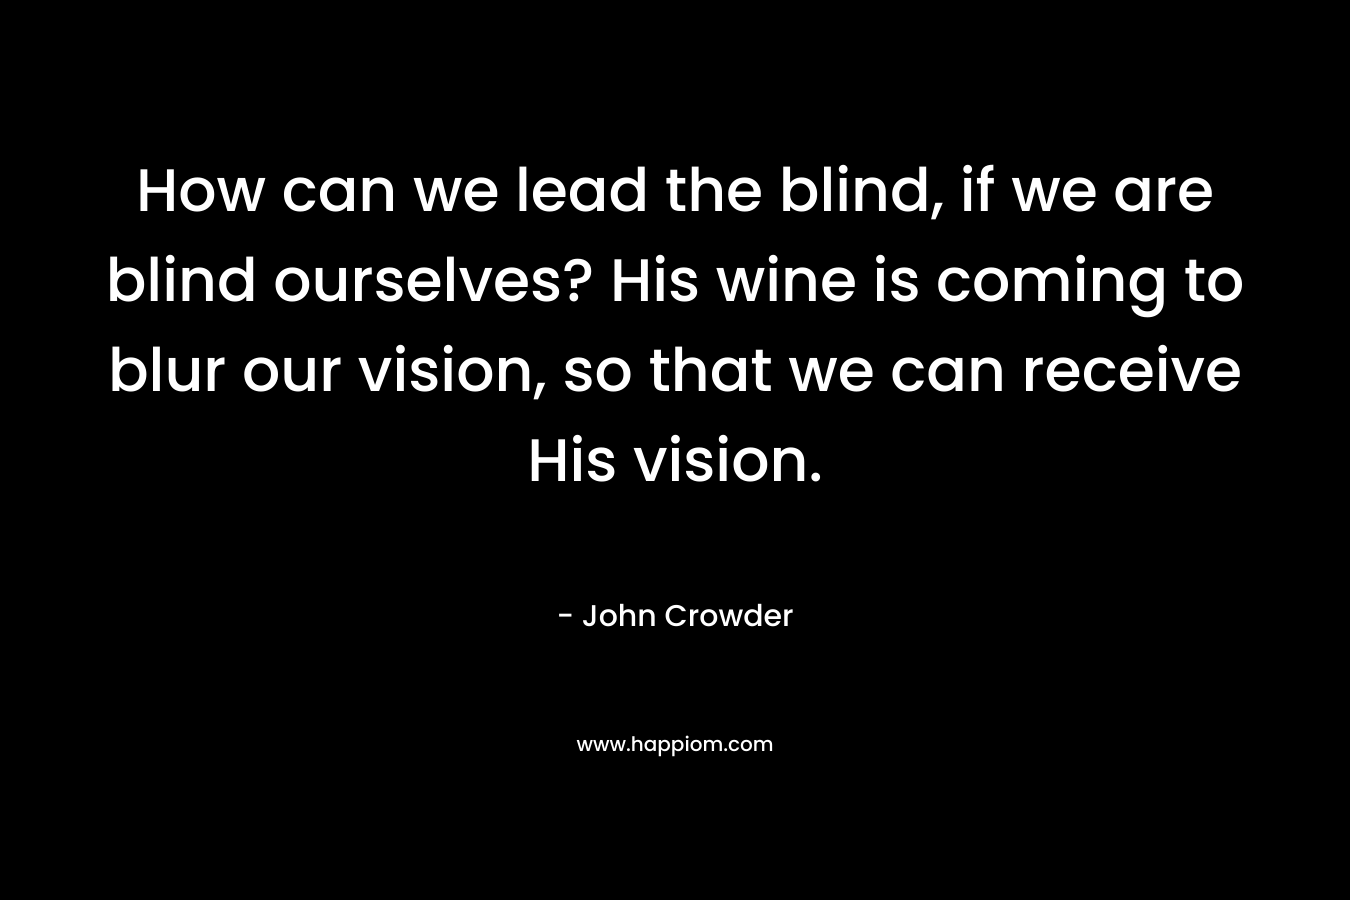 How can we lead the blind, if we are blind ourselves? His wine is coming to blur our vision, so that we can receive His vision.